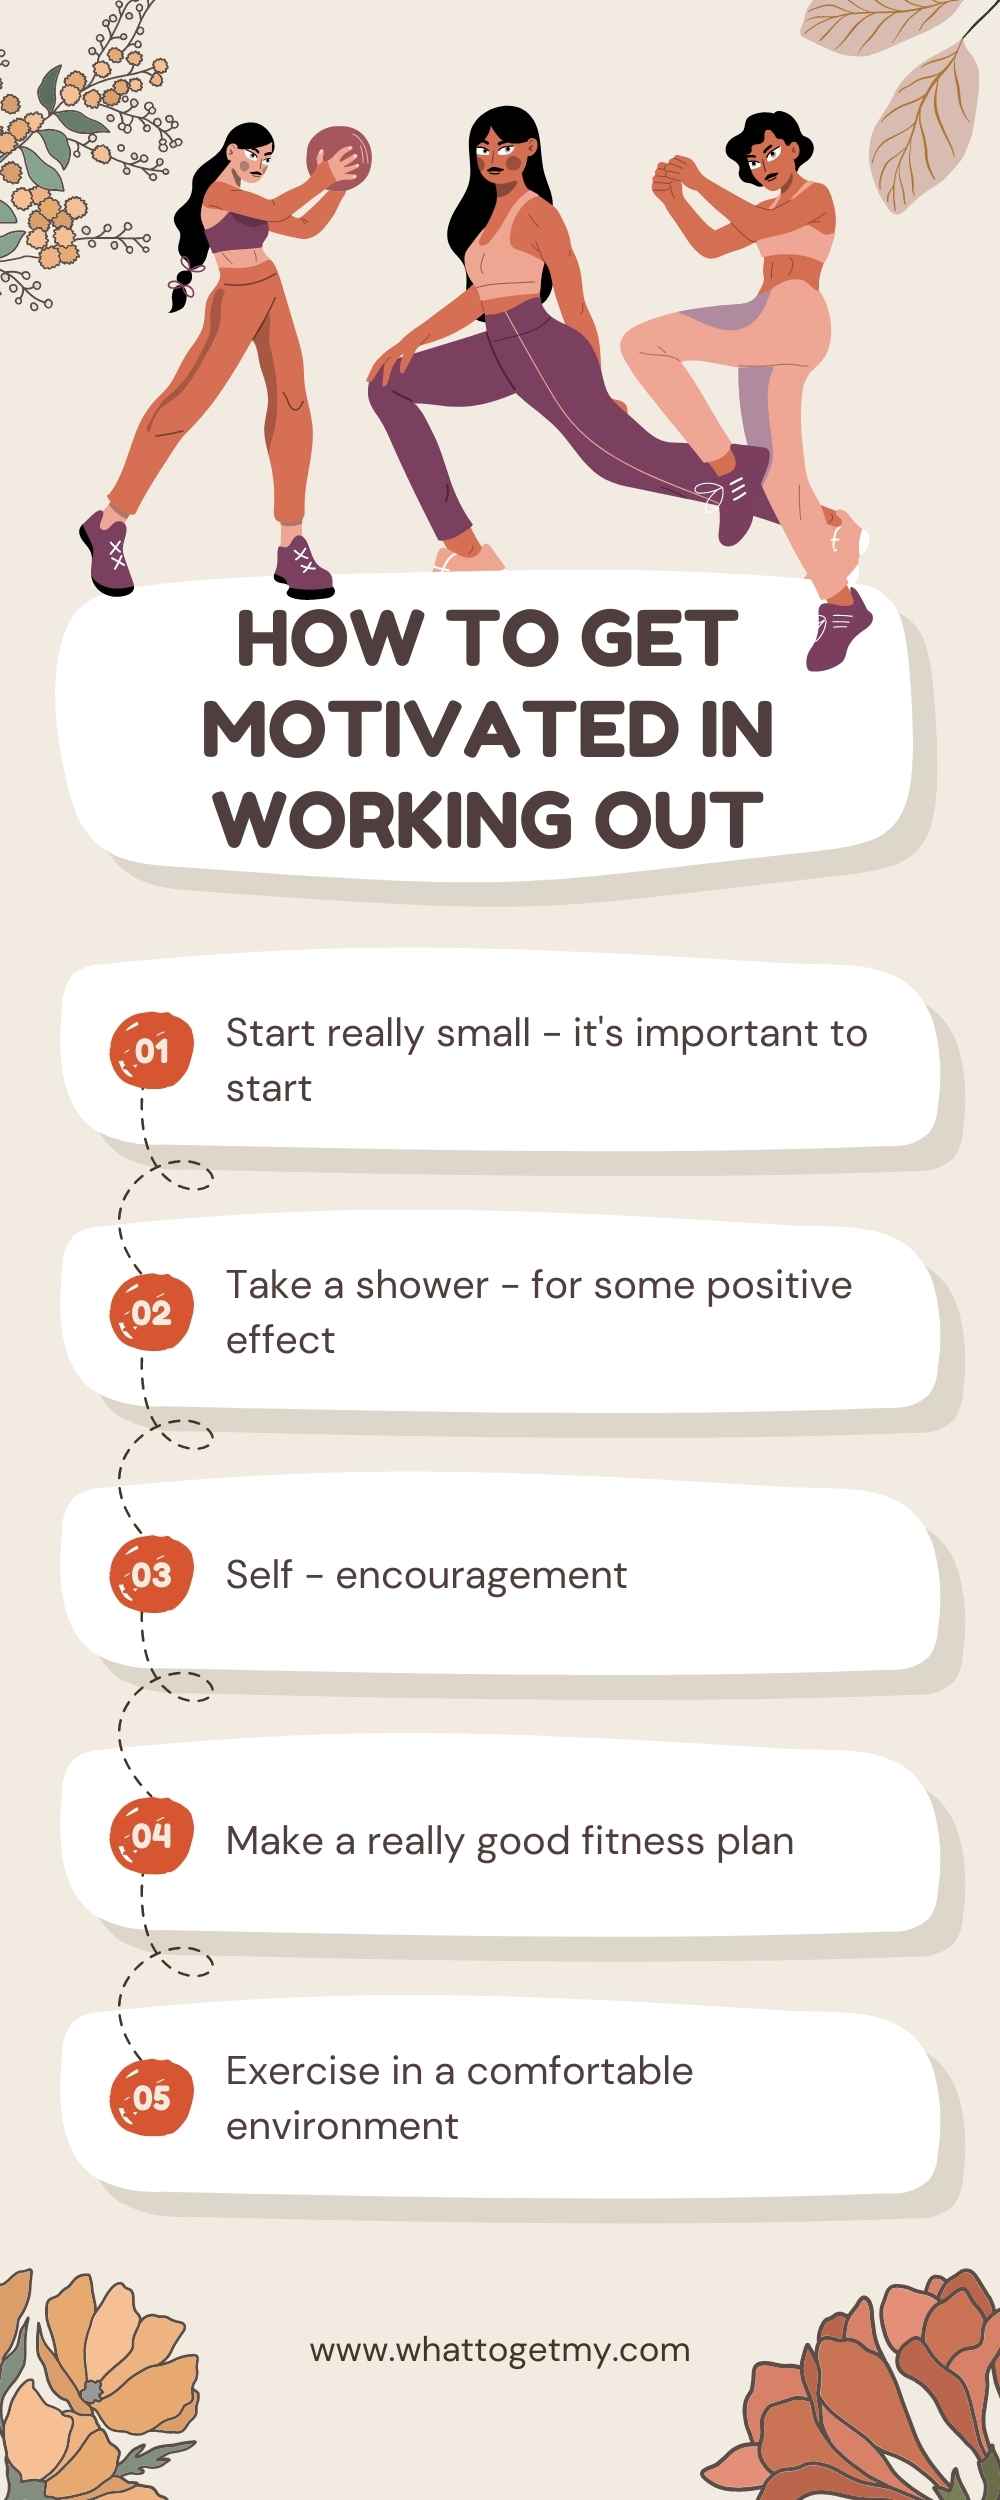 HOW TO GET MOTIVATED IN WORKING OUT